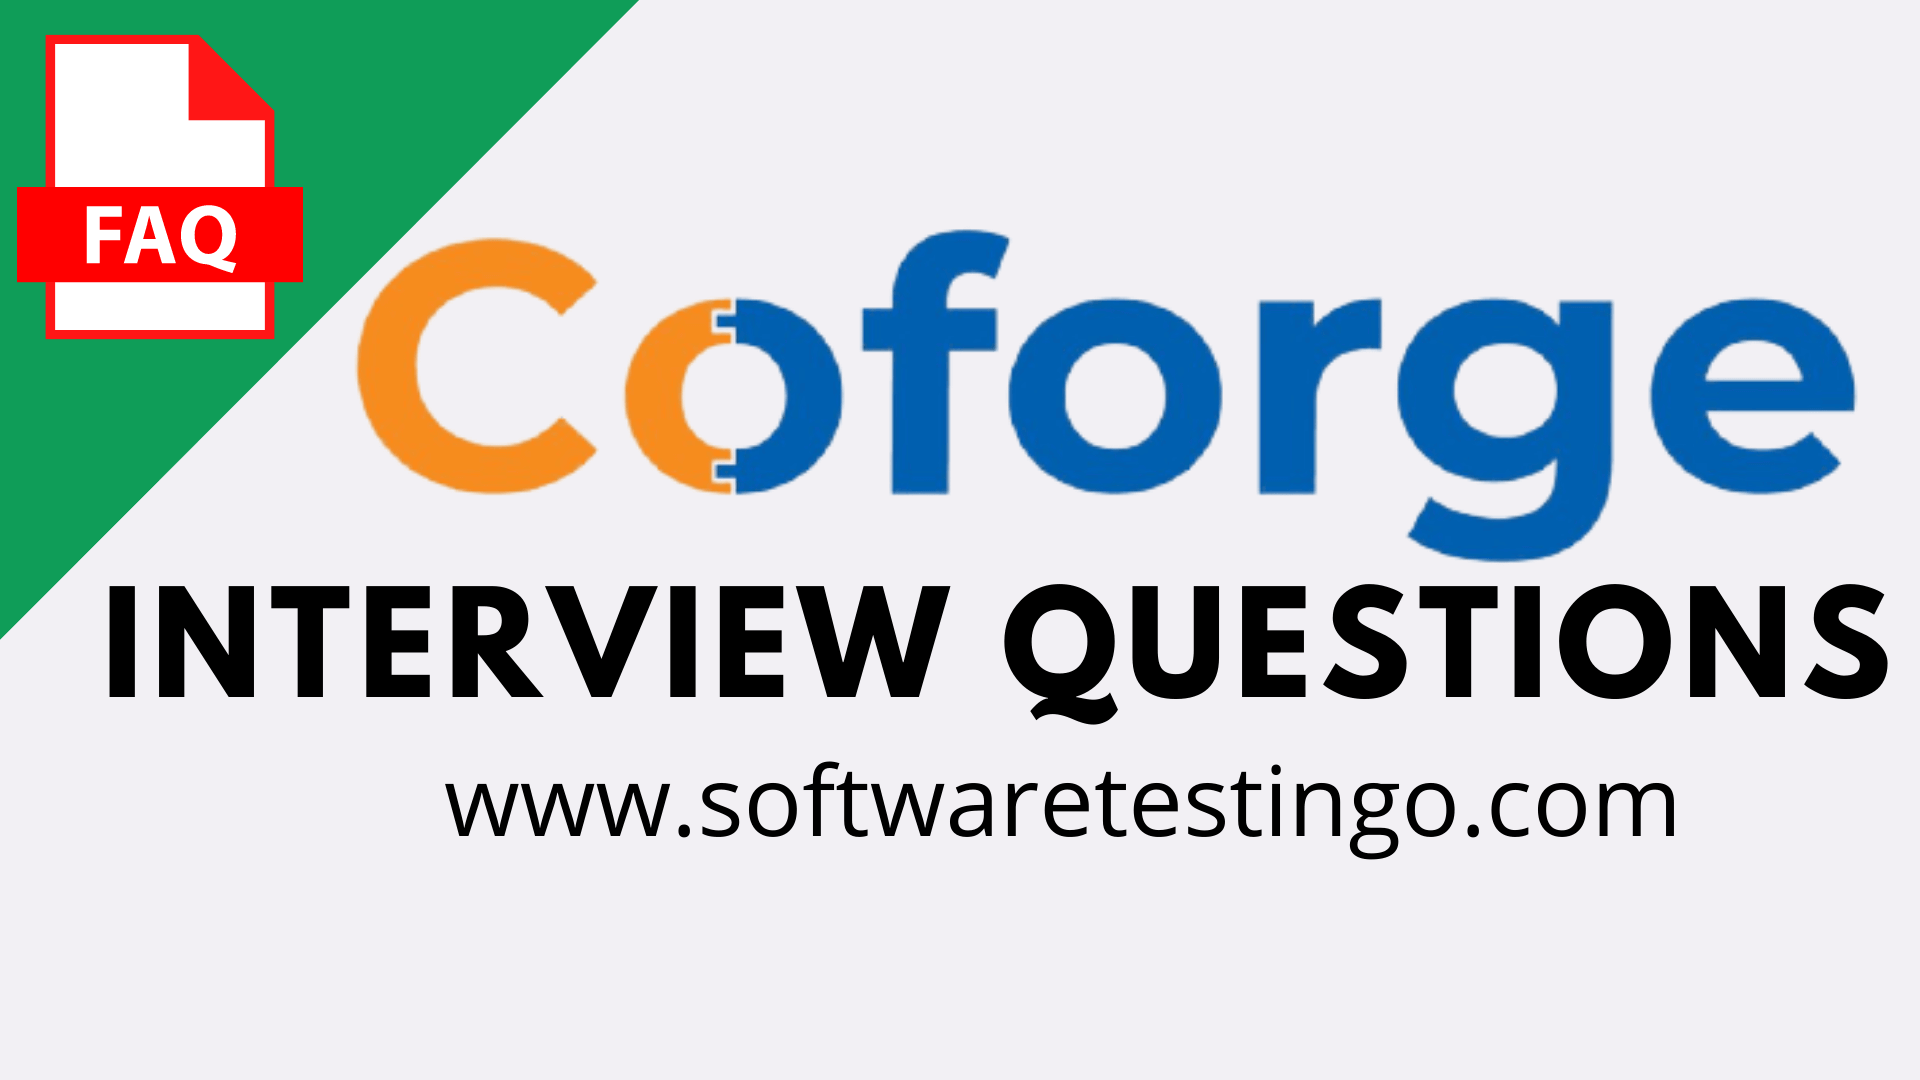 Coforge Interview Questions